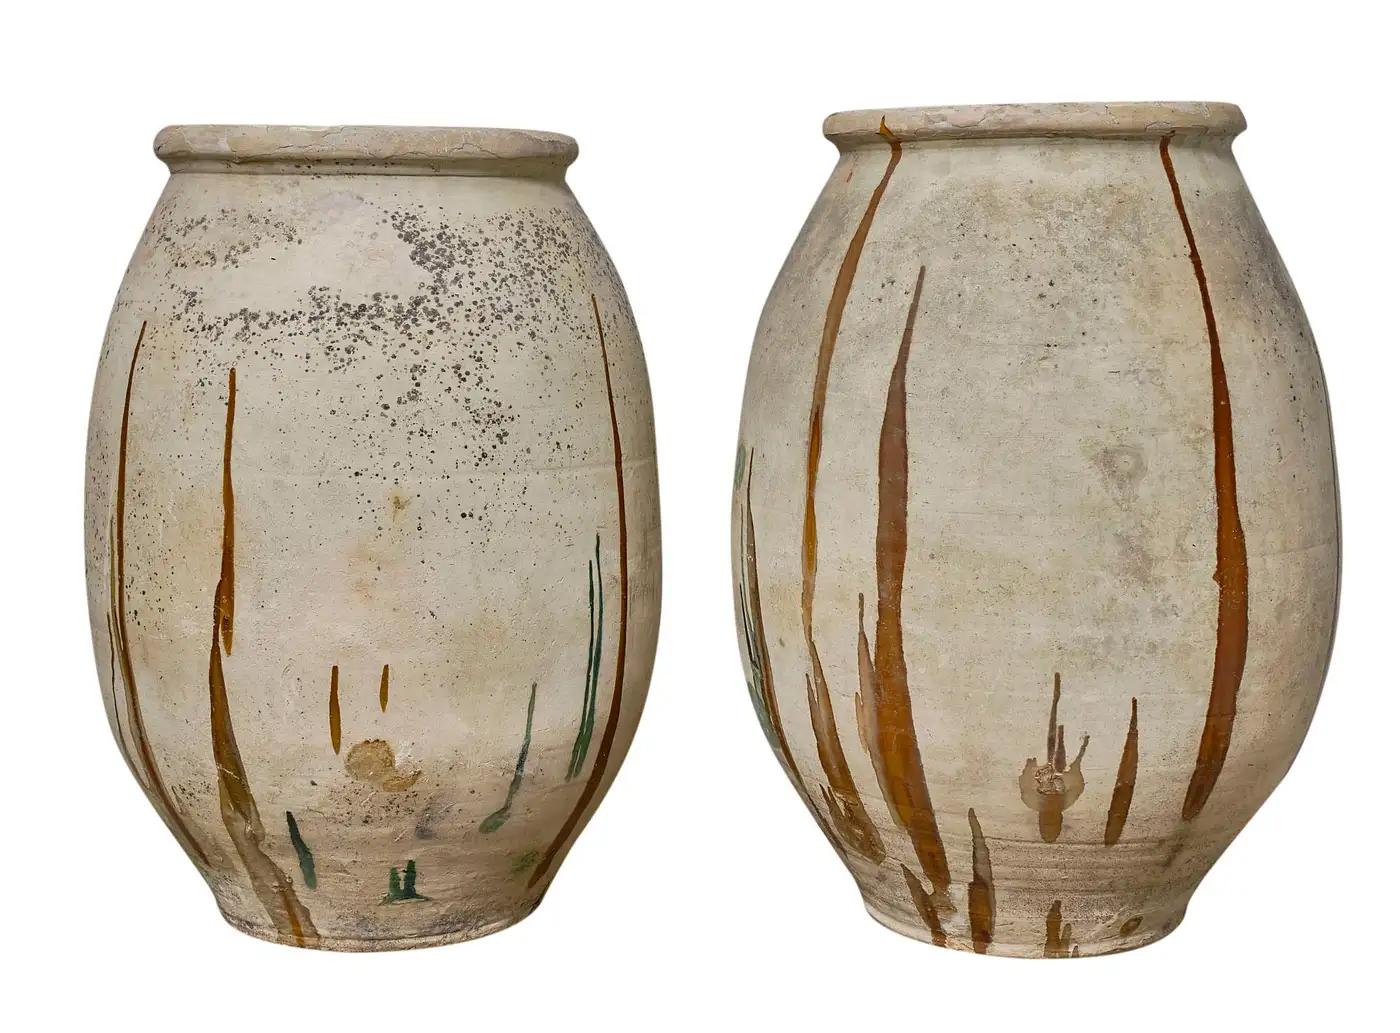 Indulge in the allure of these expansive antique Biot pots, once vessels of precious oils. Adorned with an interior glaze reflecting the distinctive palette of Southern France, these pots boast impeccably preserved original finishes. A splendid